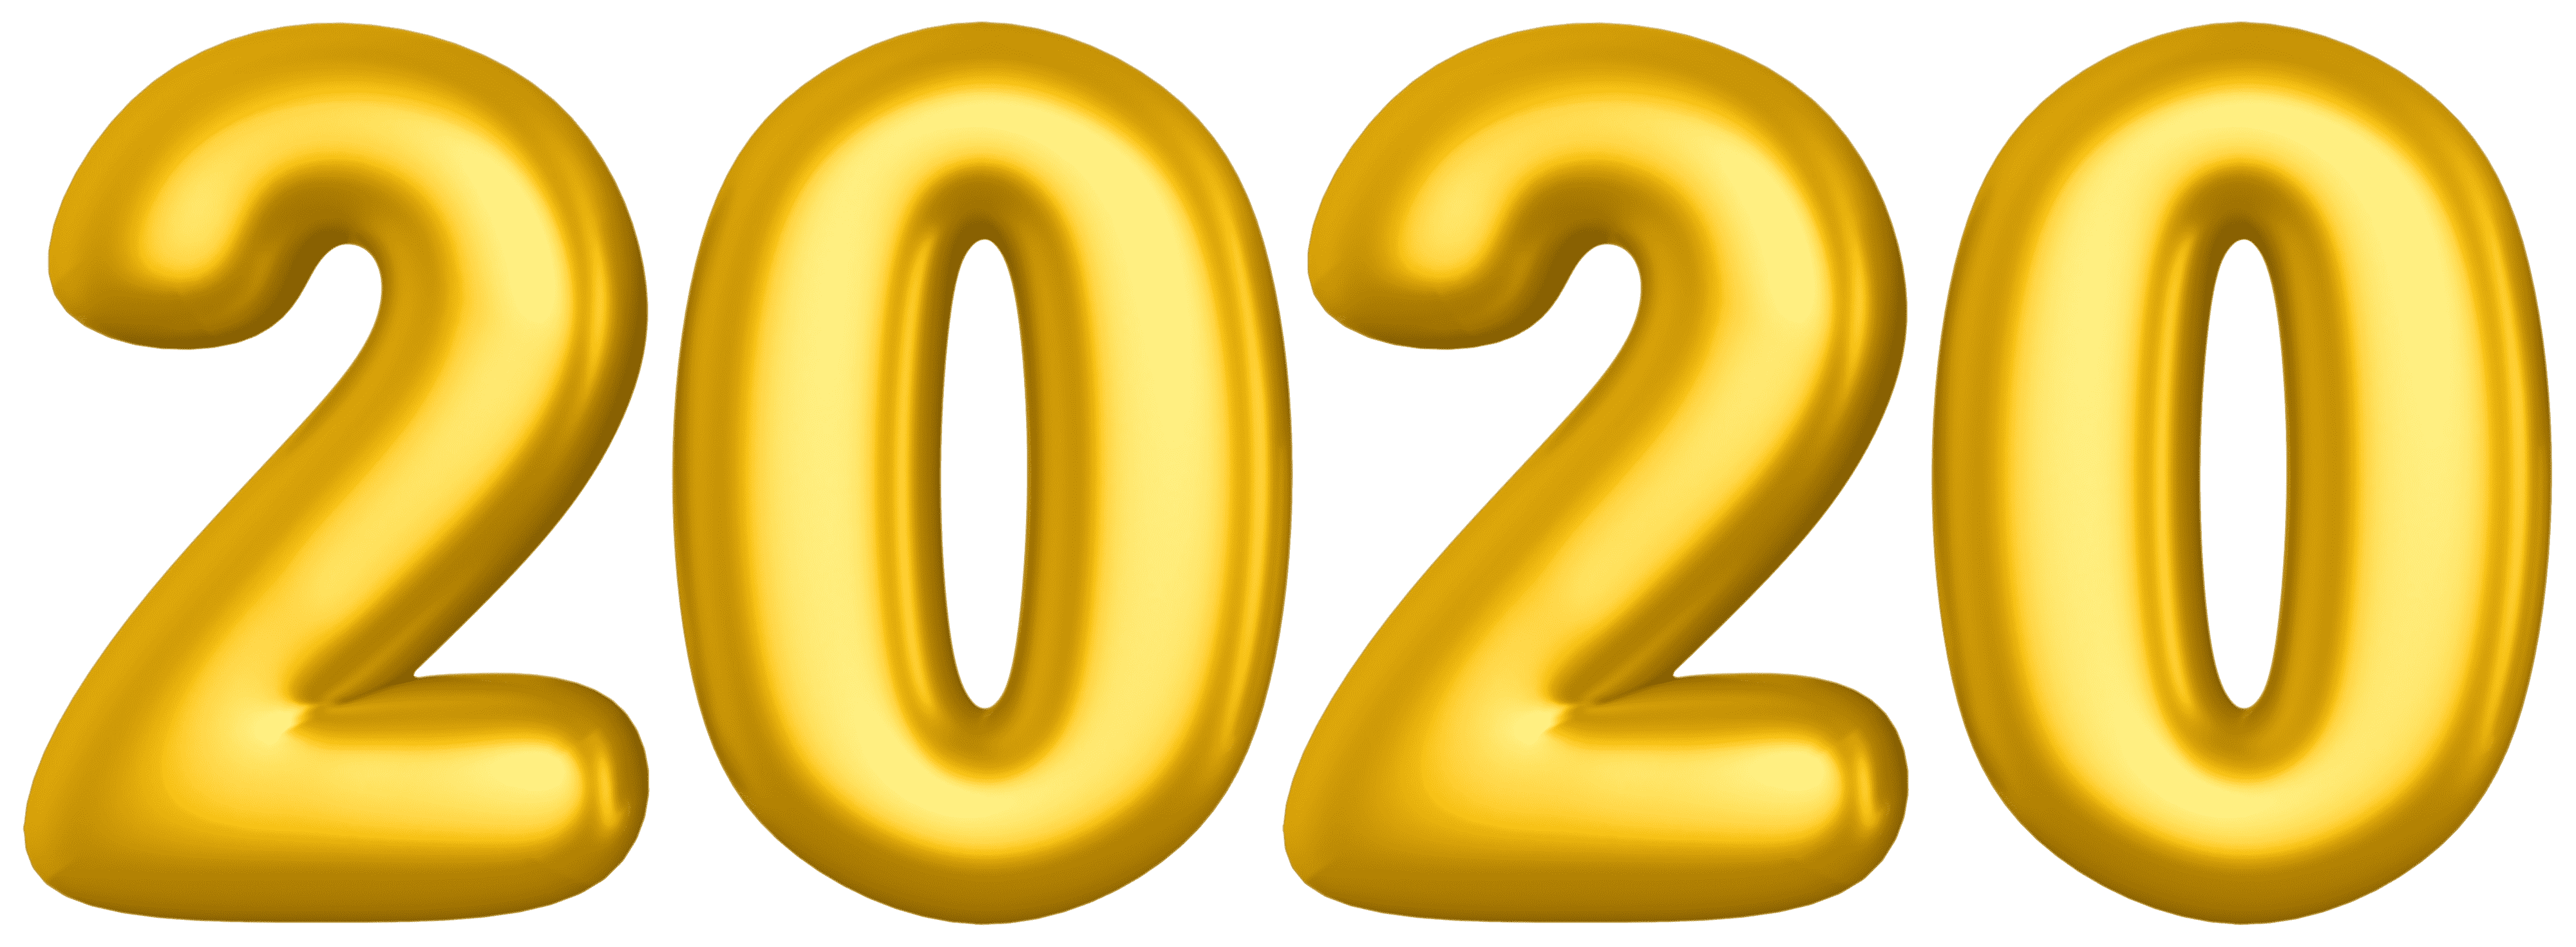 2020 Yellow PNG Clip Art Image